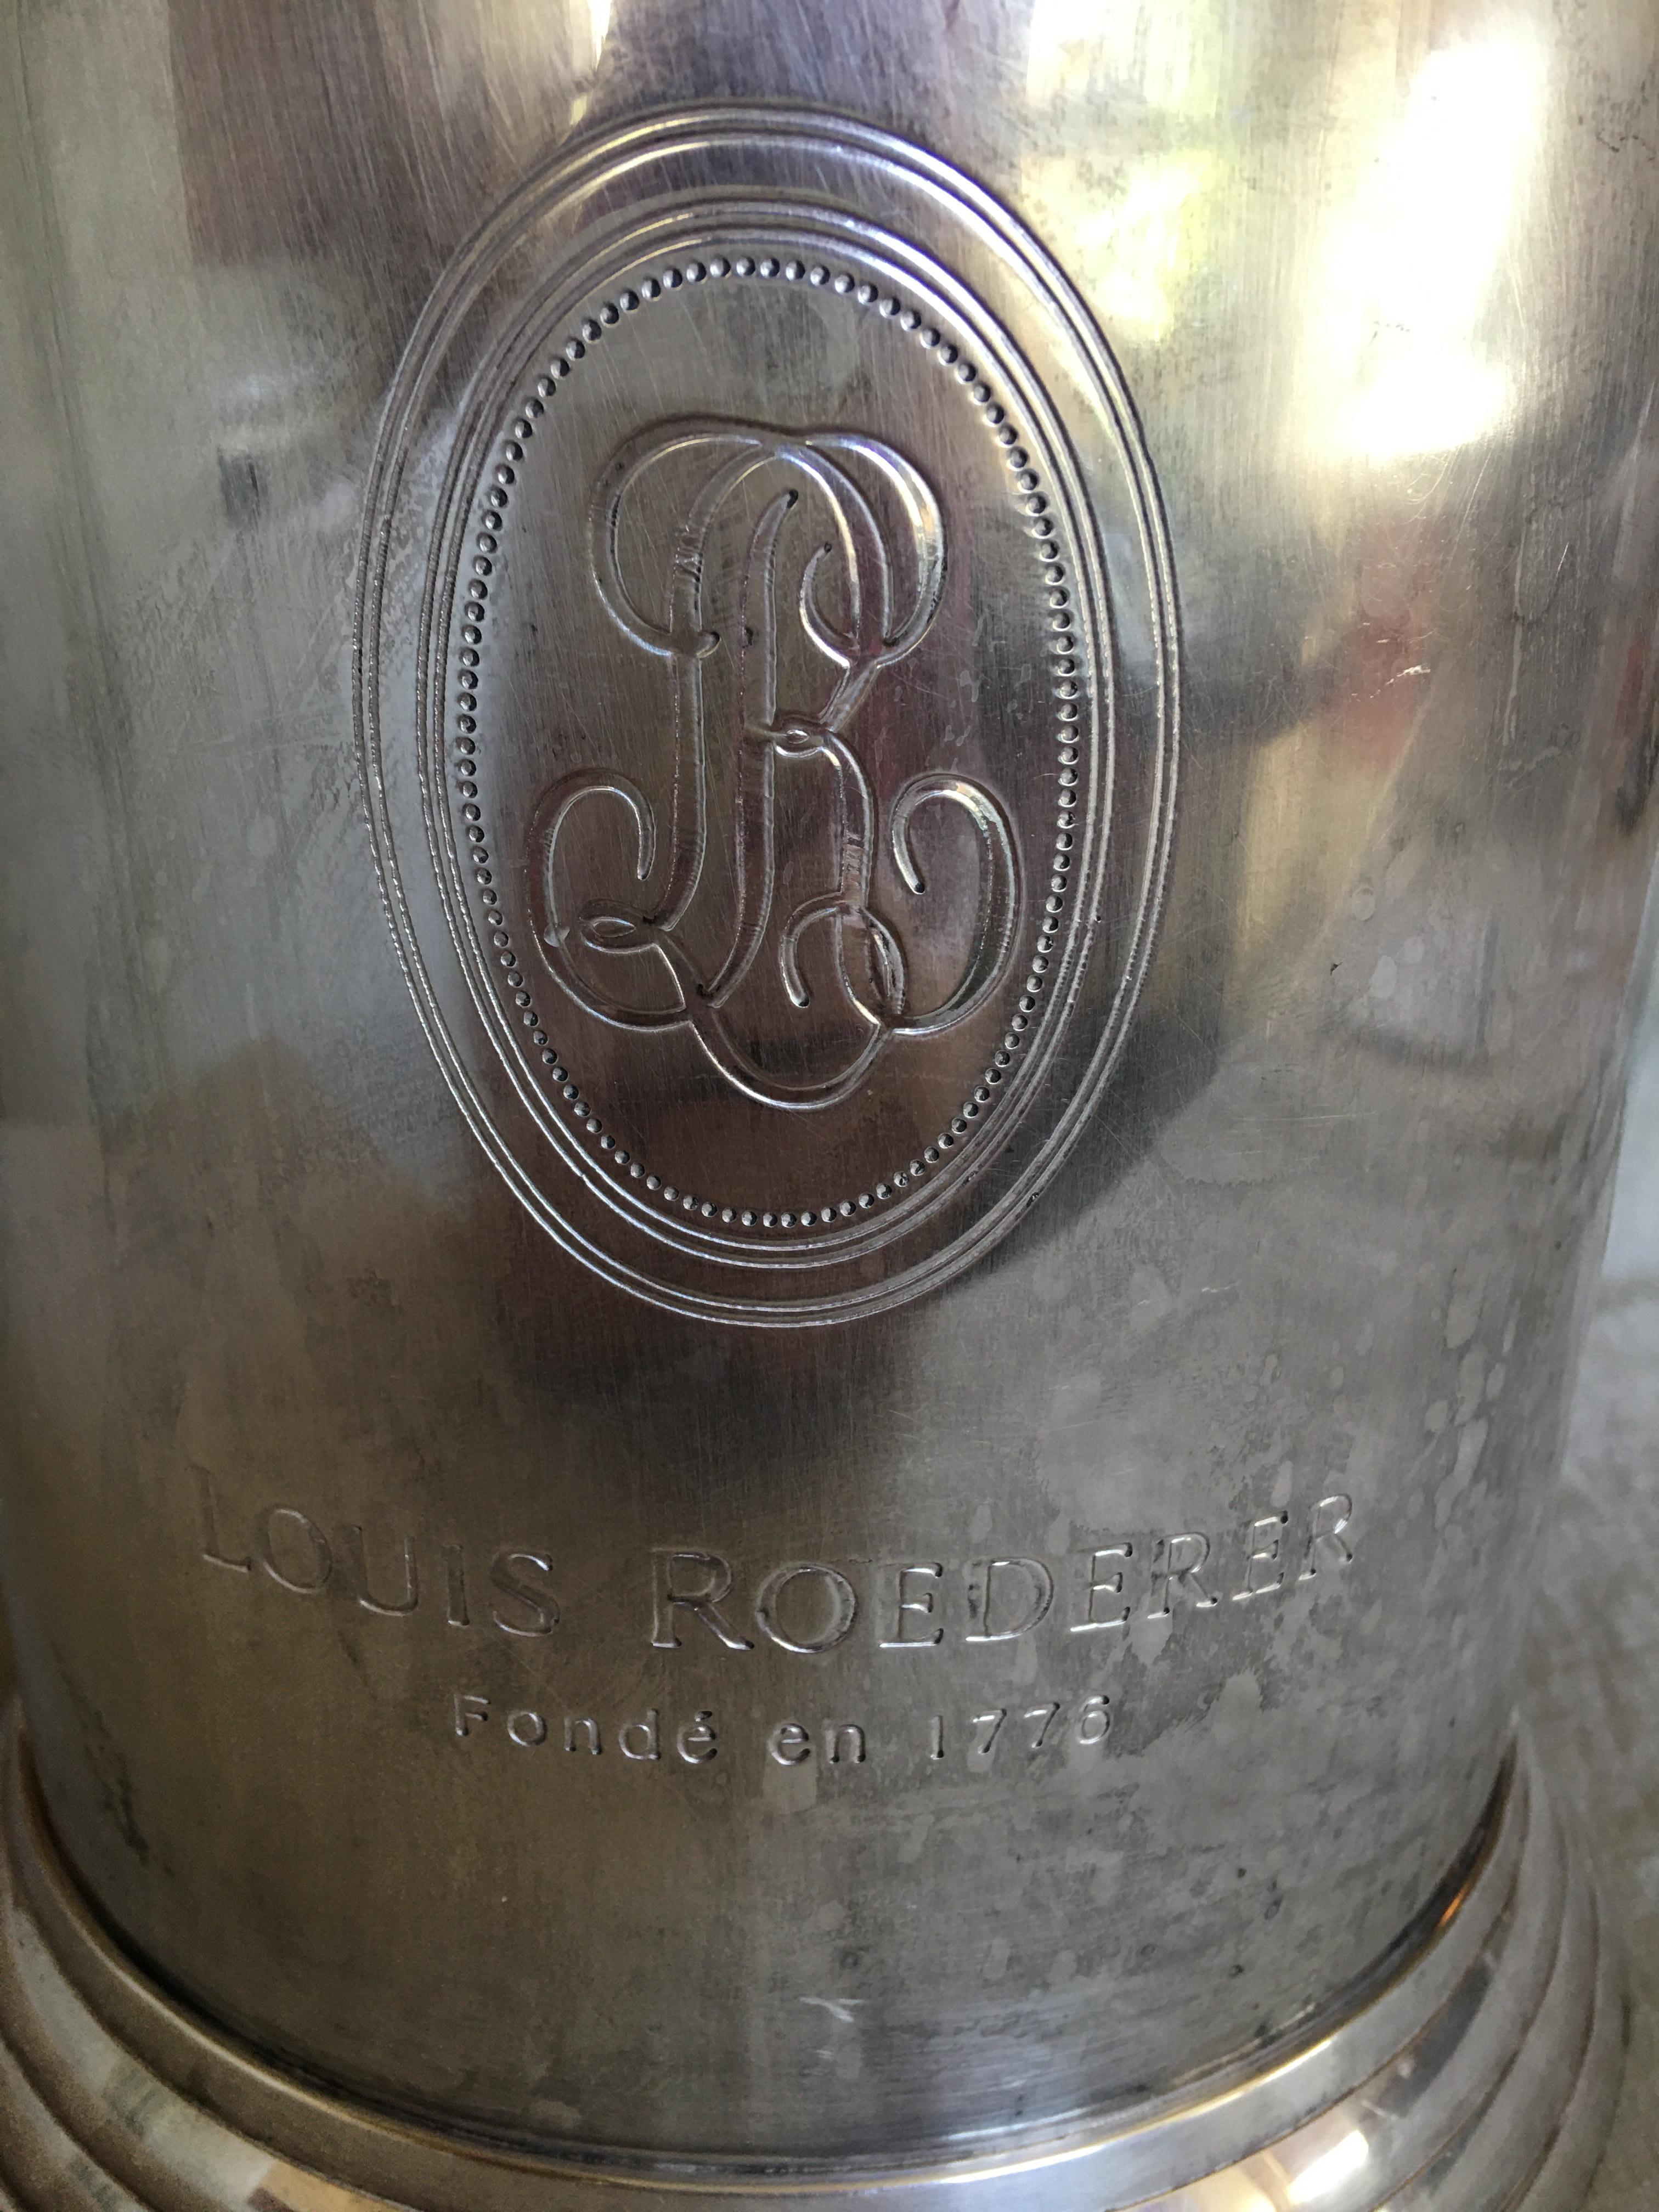 American Louis Roederer Silver Plate Champagne Bucket with Handles, 20th Century, Stamped